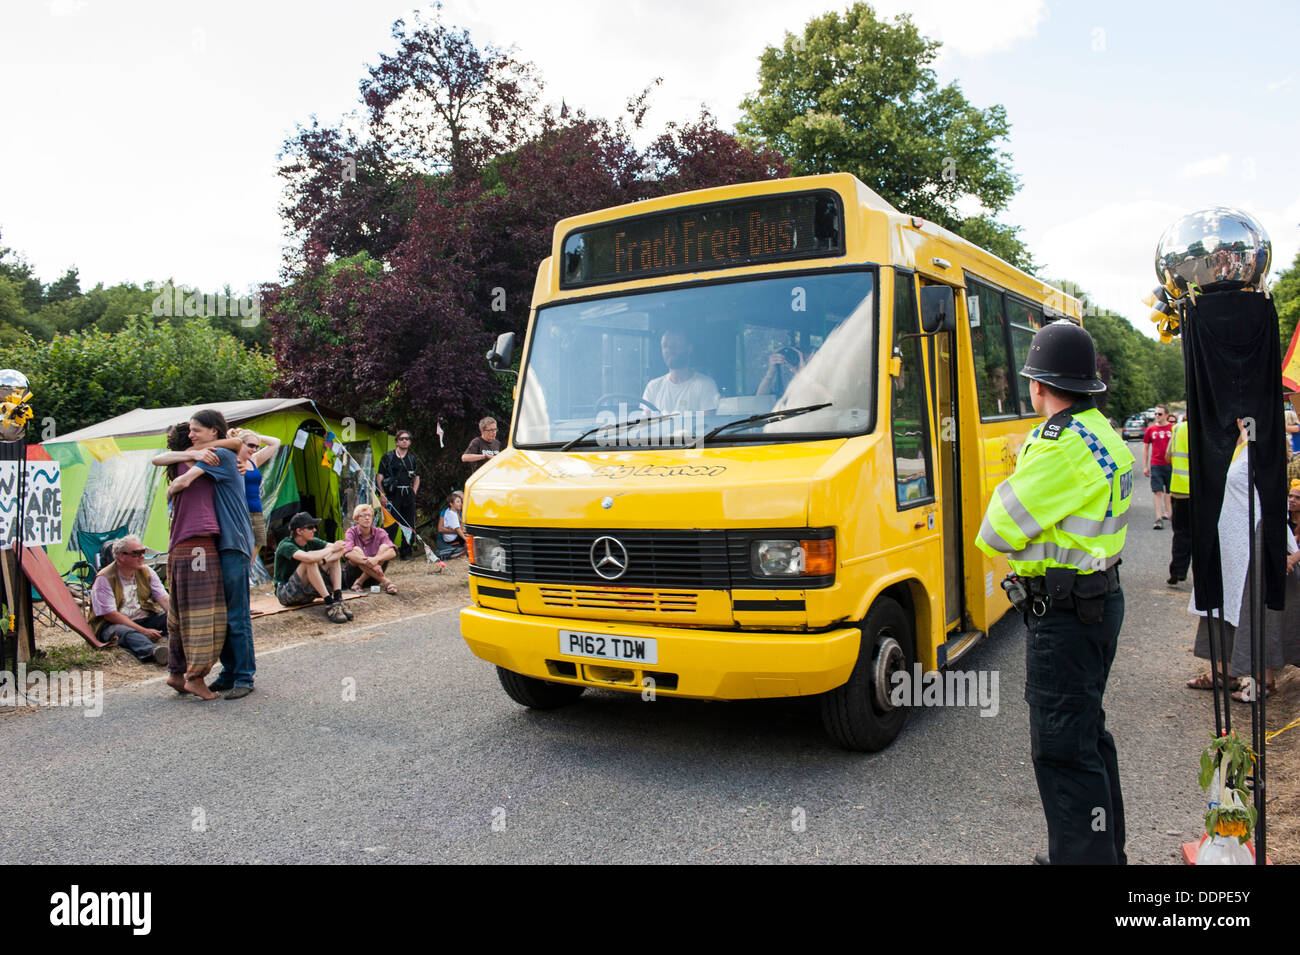 'Frack Free Bus' at 'Belt It Out Balcombe' event, Balcombe, West Sussex, for the anti-fracking campaign, 11th August 2013 Stock Photo